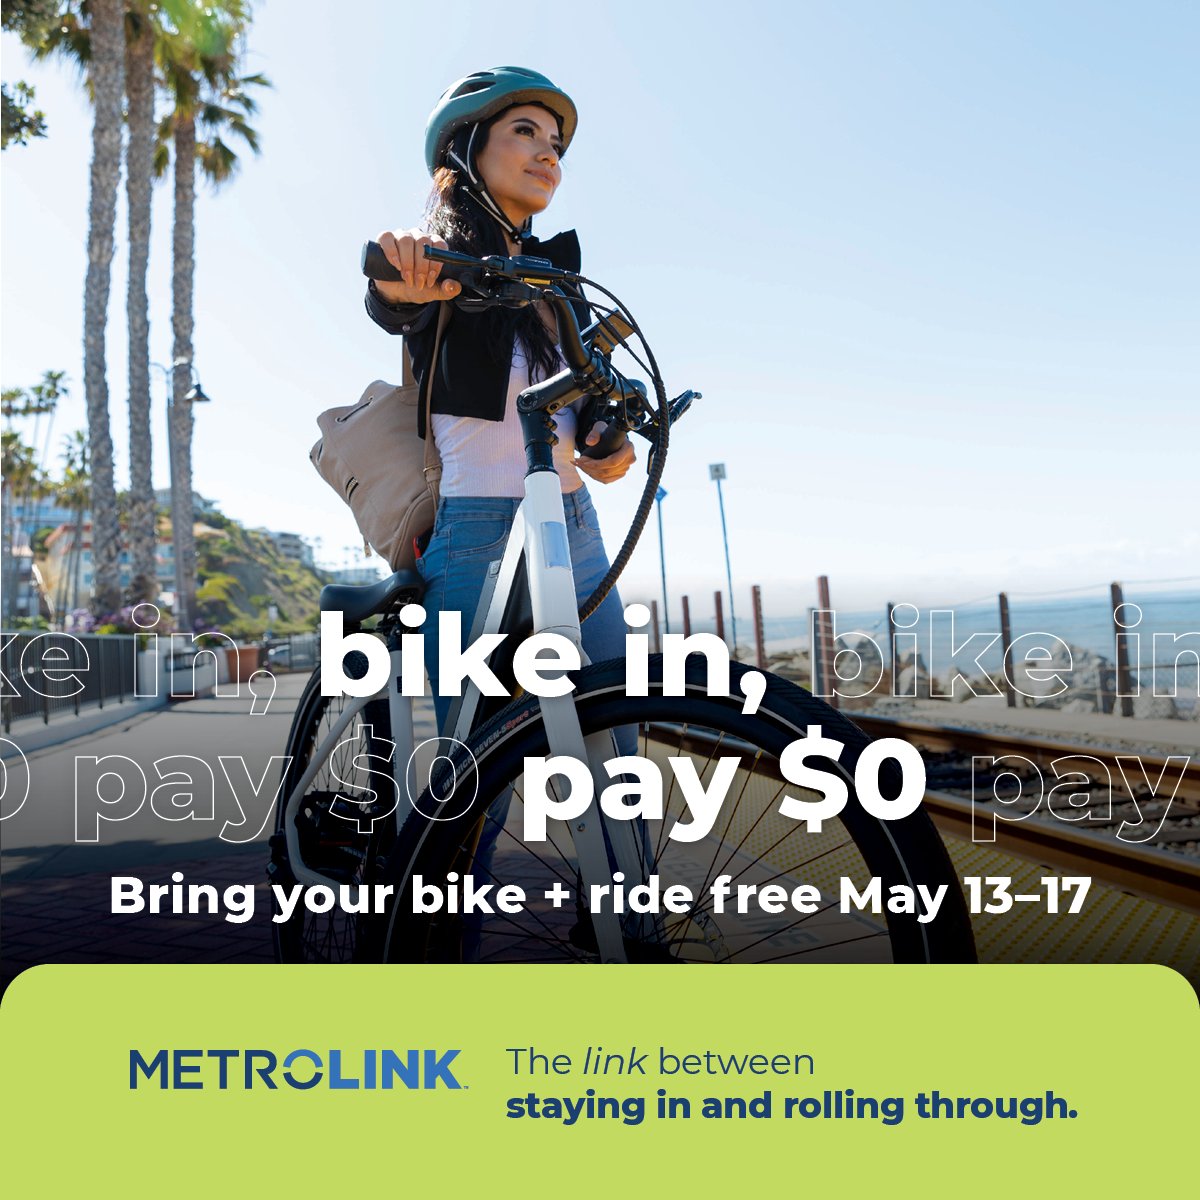 BIKE WEEK is coming! Want to try a new trail? Or perhaps a more eco-friendly commute? Ride Metrolink FREE when you board with your bike, May 13-17.   

#takethetrain #bikeweek #nationalbikemonth #bikemonth #biketoworkweek